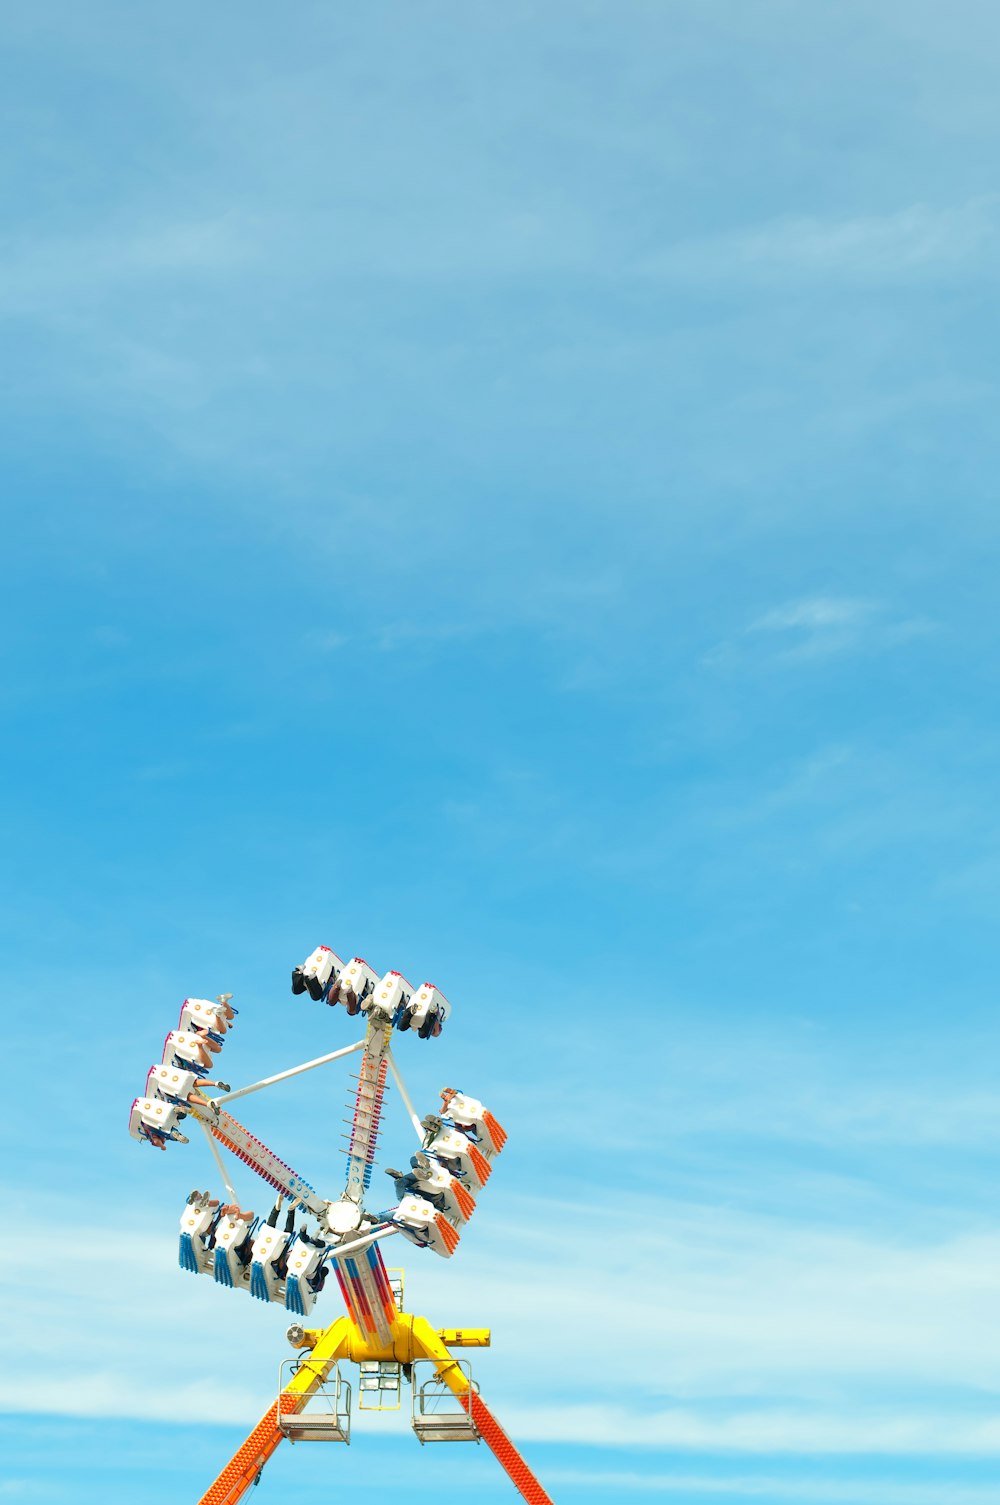 photo of yellow, orange, and blue amusement park ride under clear blue sky